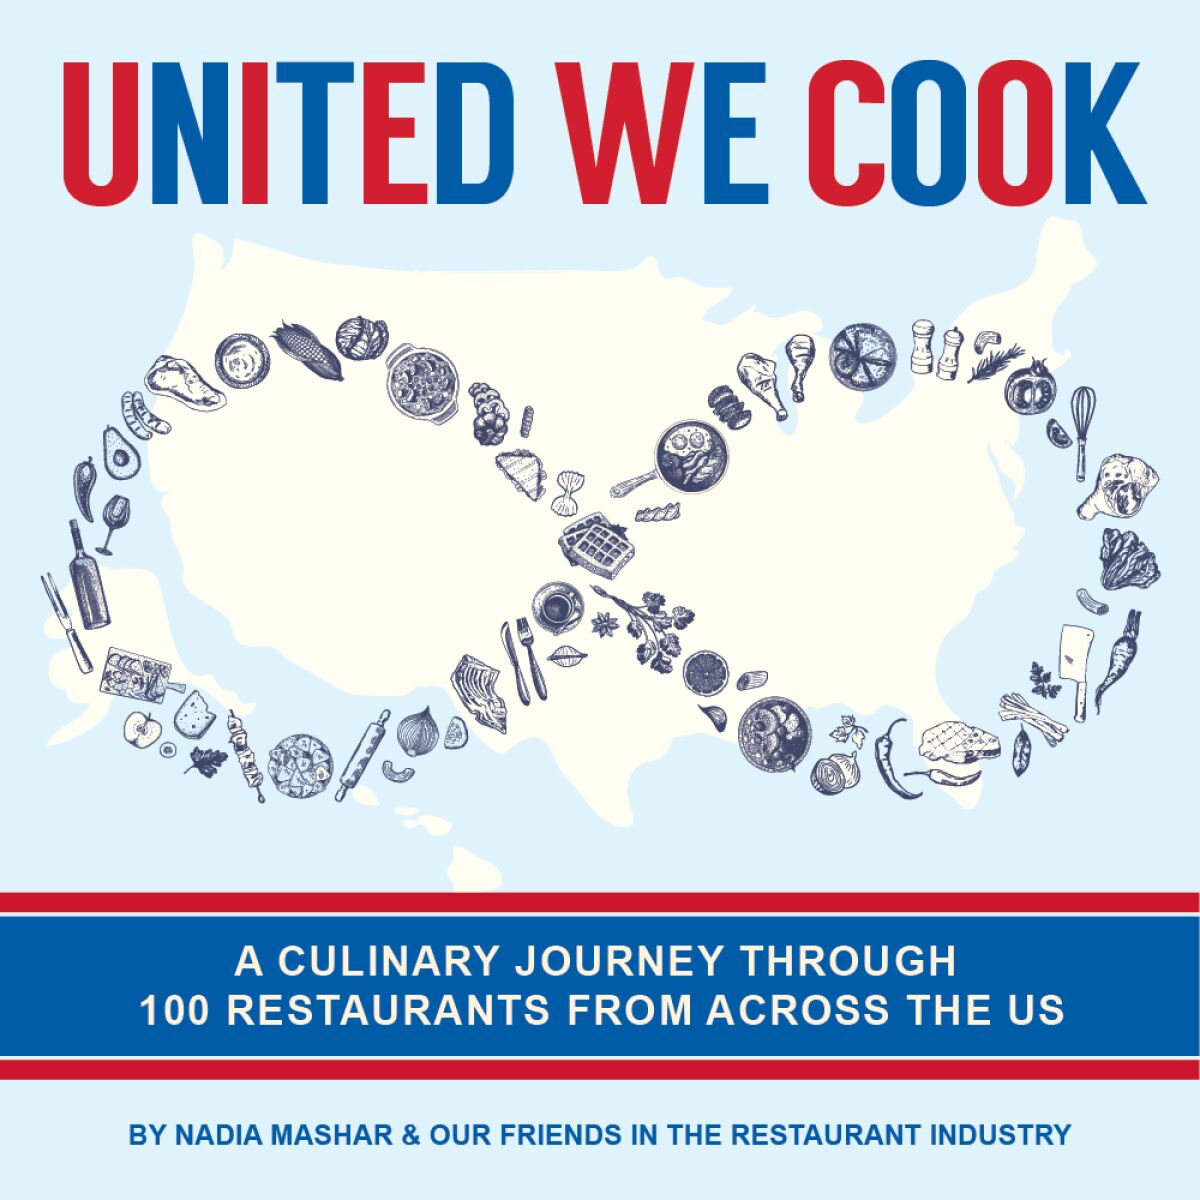 "United We Cook" includes La Jolla restaurant Nine-Ten in its collection of recipes.